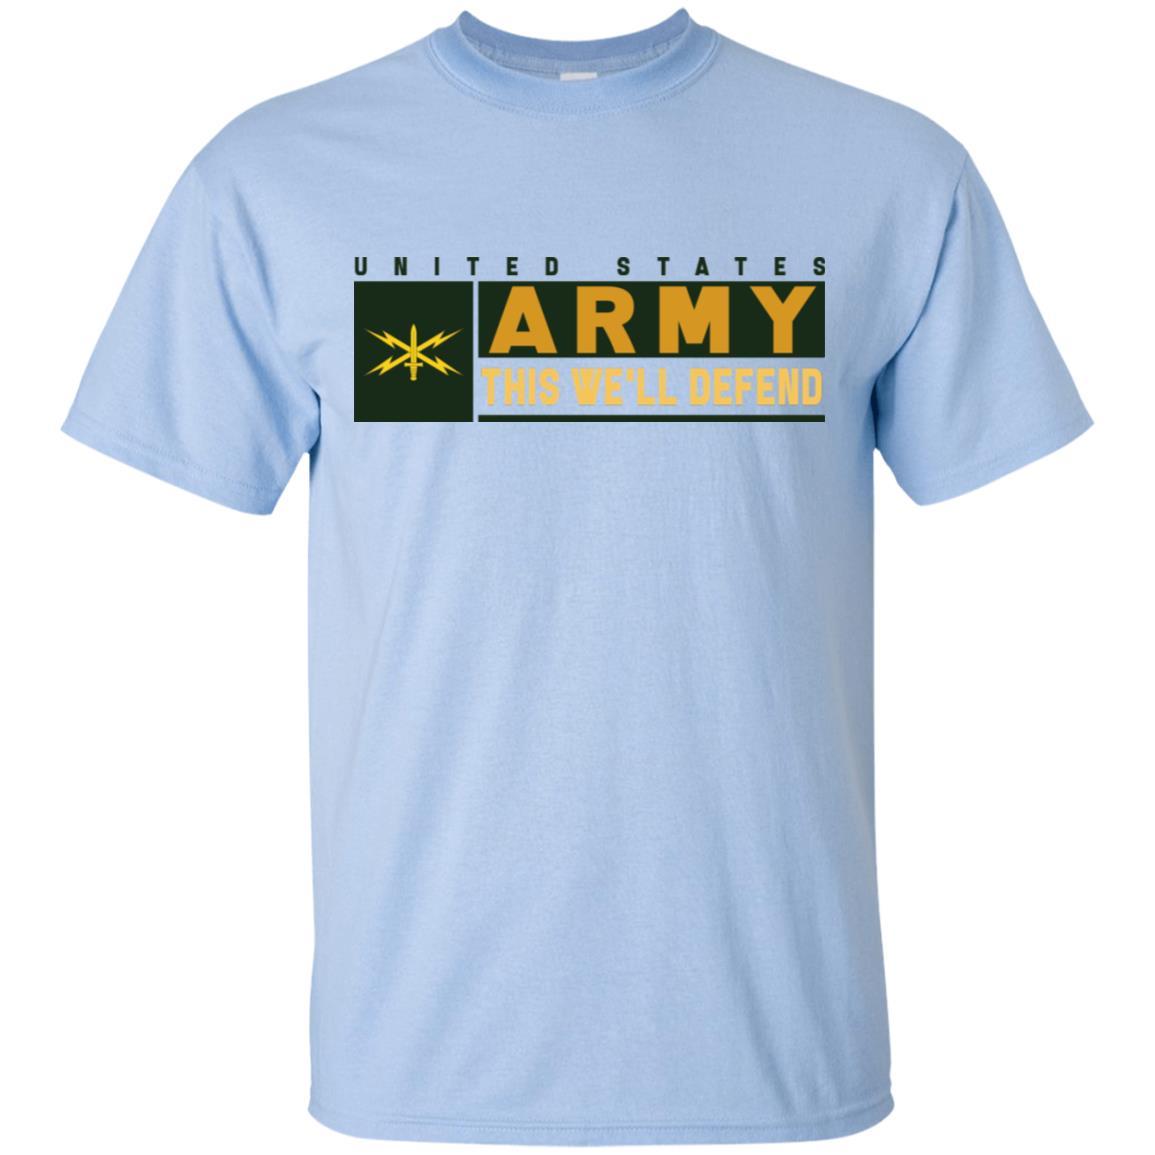 U.S. Army Cyber Corps- This We'll Defend T-Shirt On Front For Men-TShirt-Army-Veterans Nation